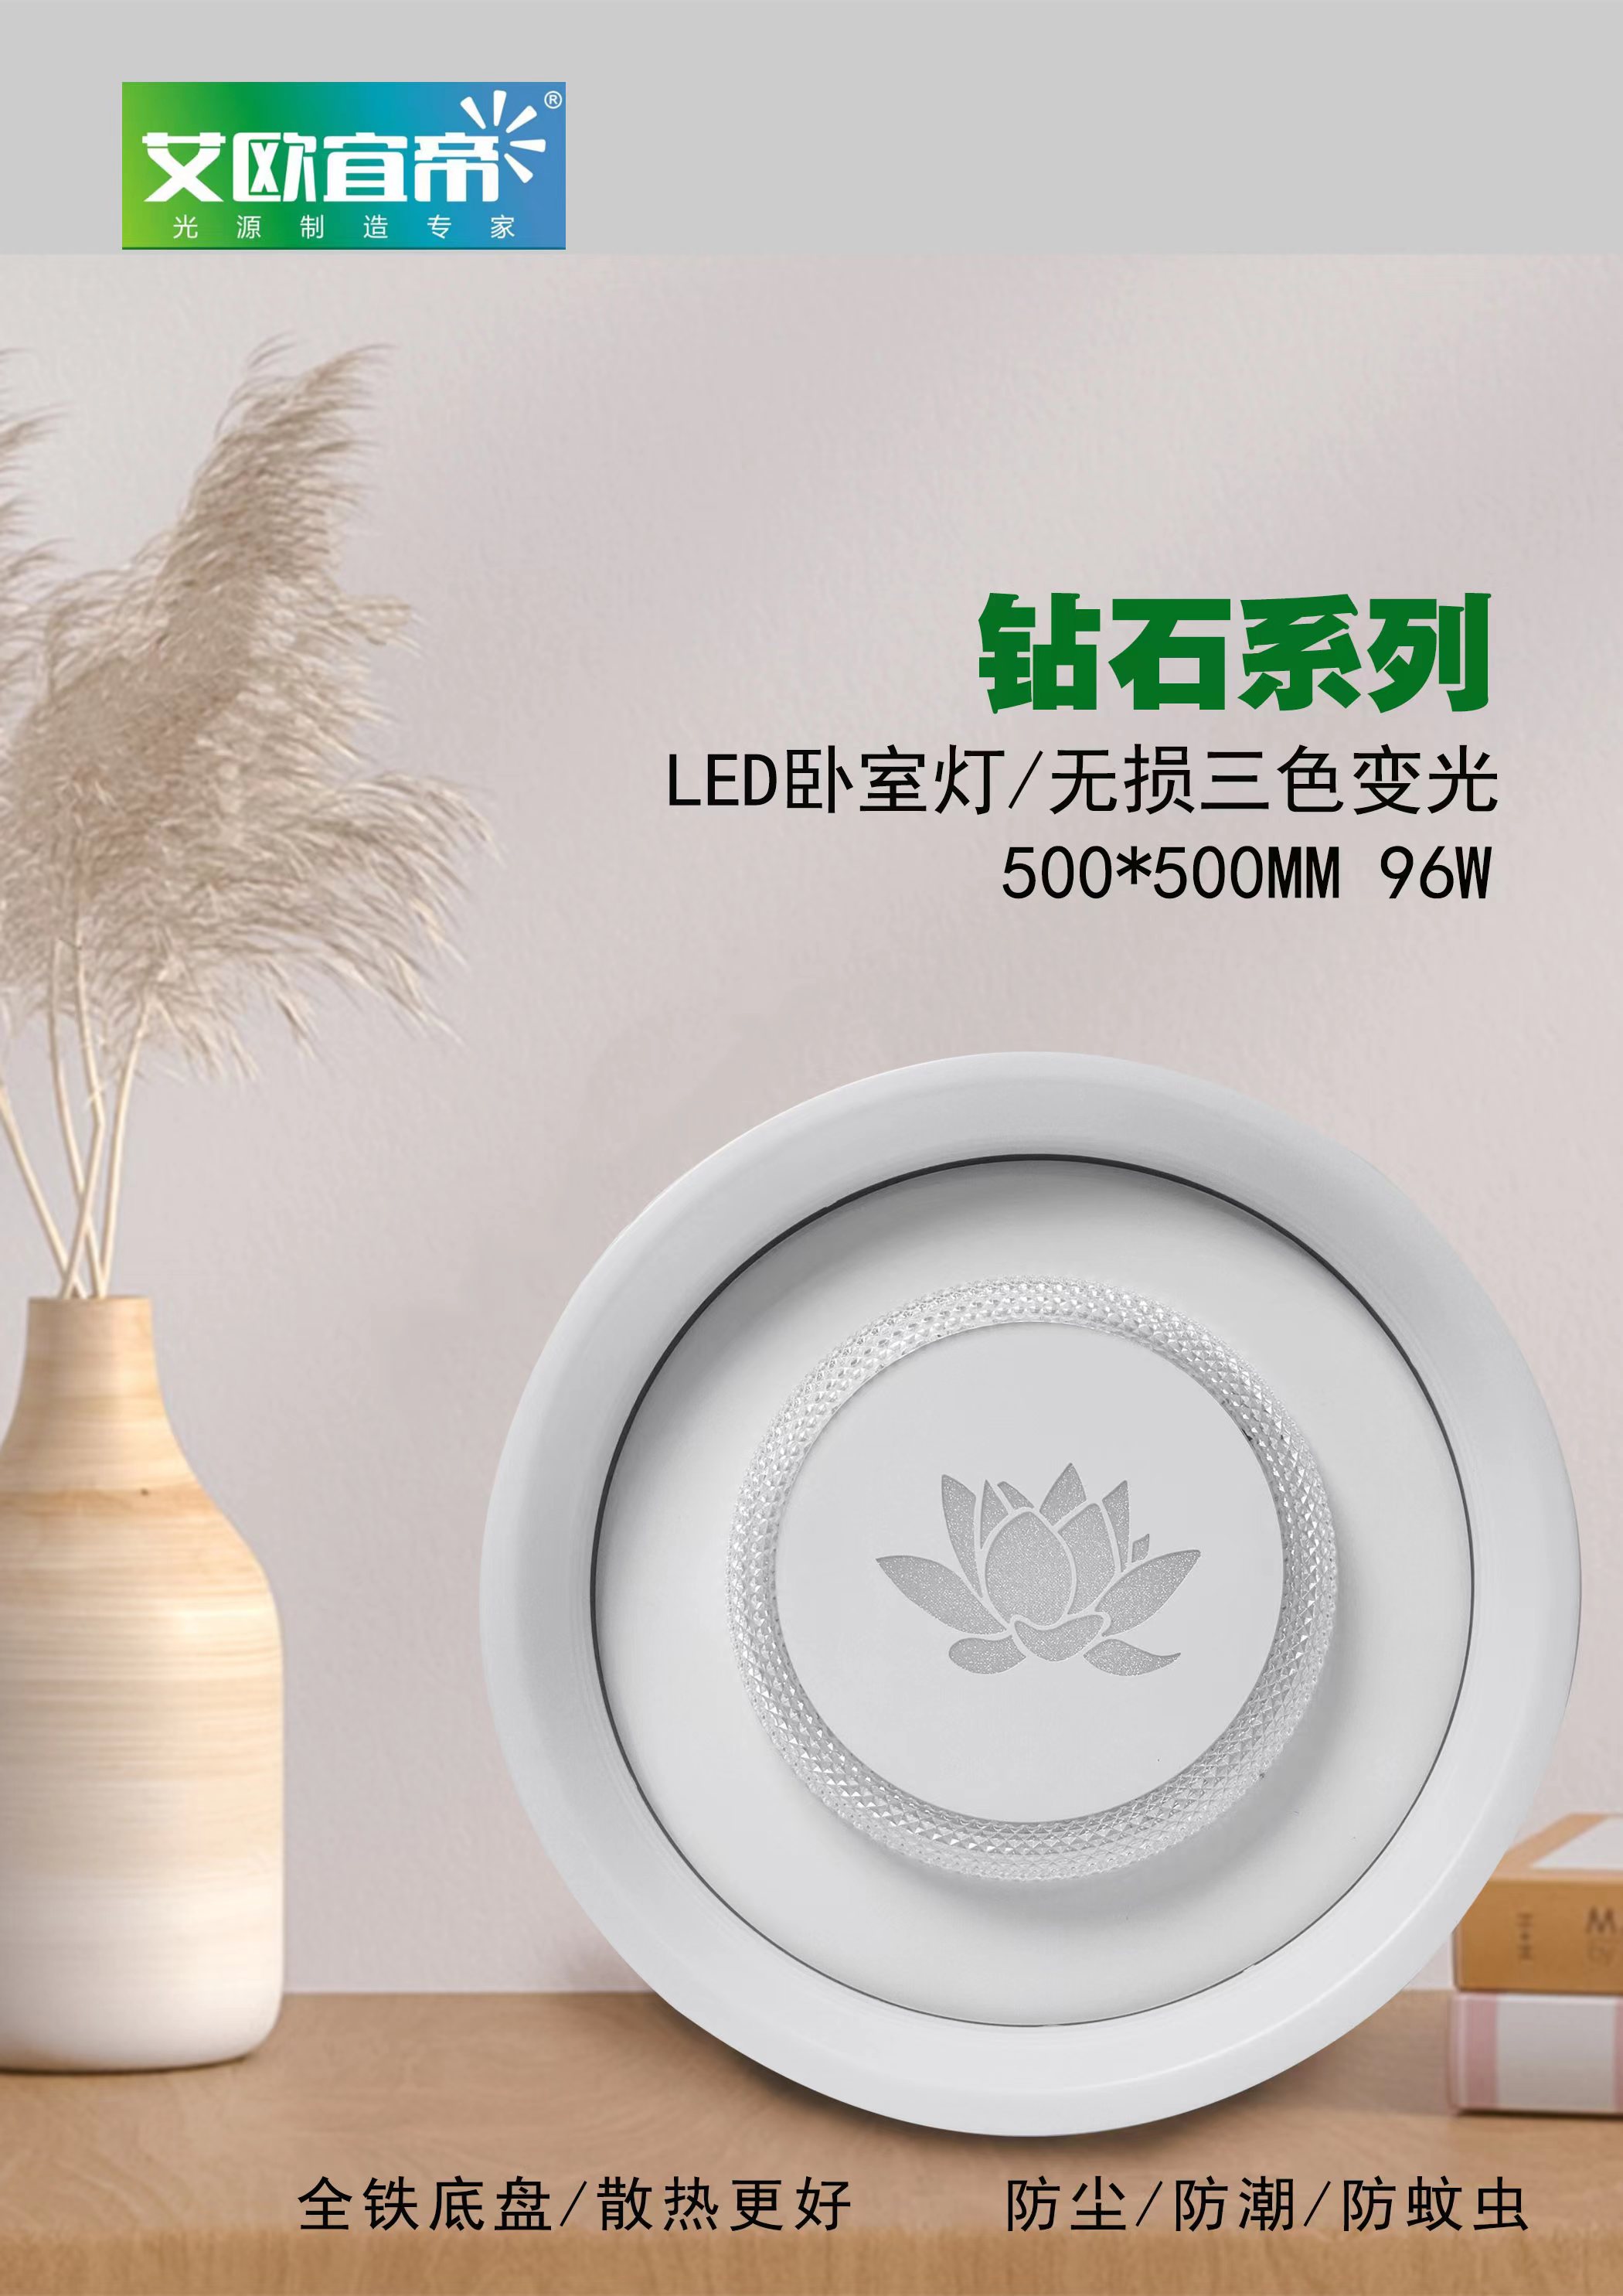 Diamond series non-destructive three-color light-changing LED bedroom three-proof ceiling lamp